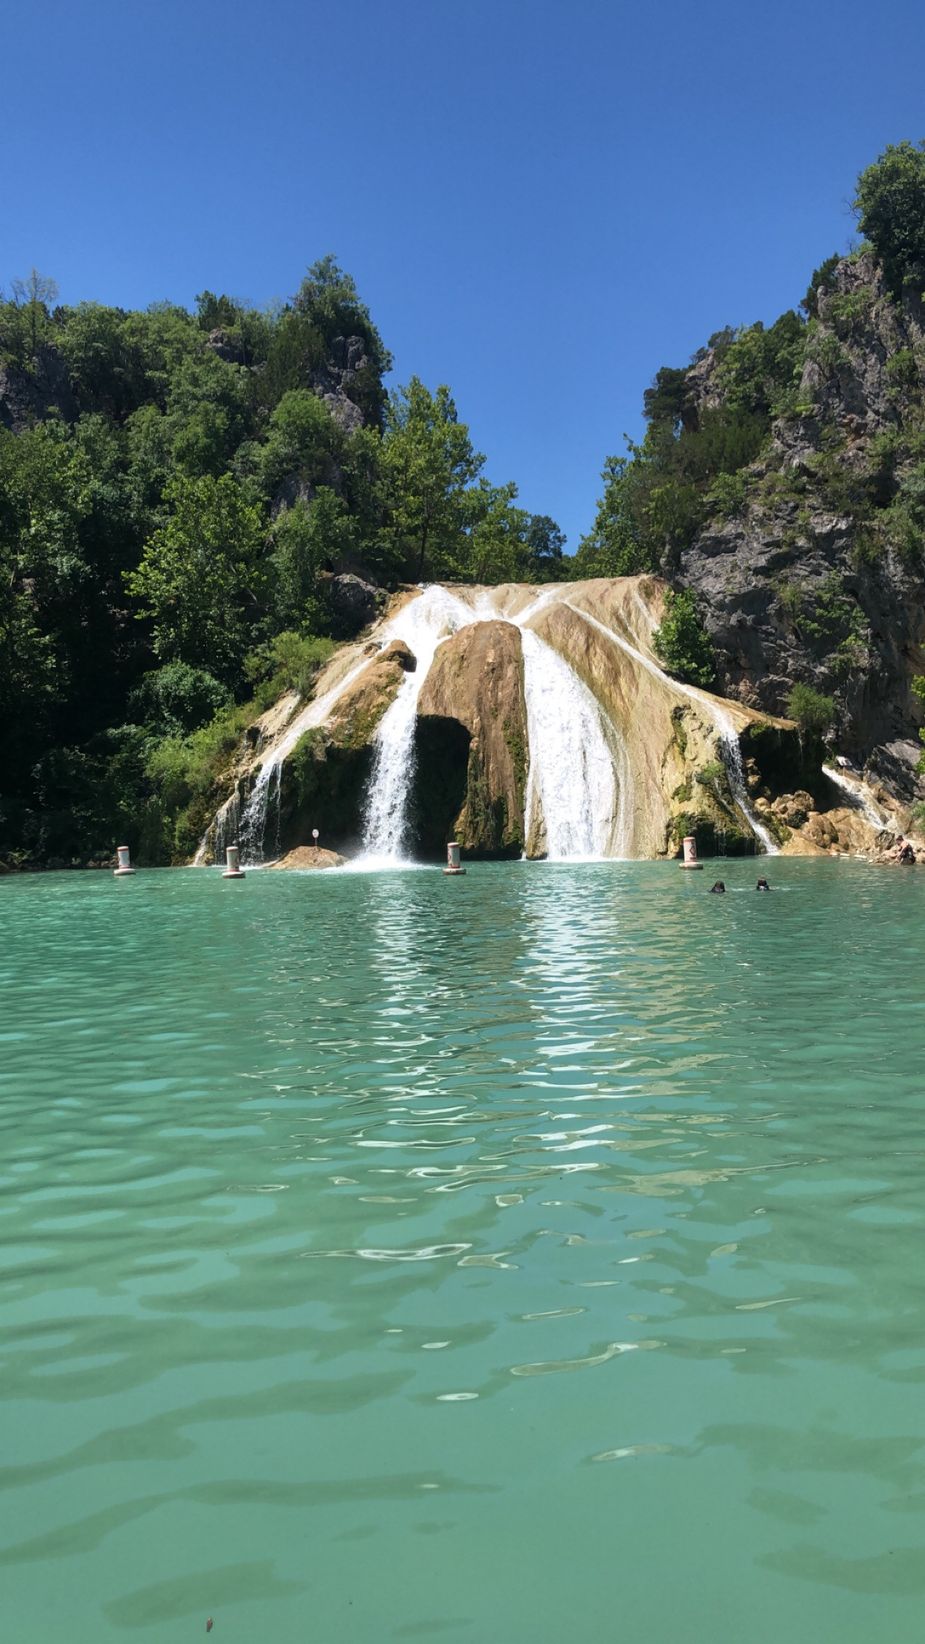 Not every summer destination needs to be something totally new to you. Turner Falls near Davis remains an iconic Oklahoma summer oasis. Photo by Kiersten Stone